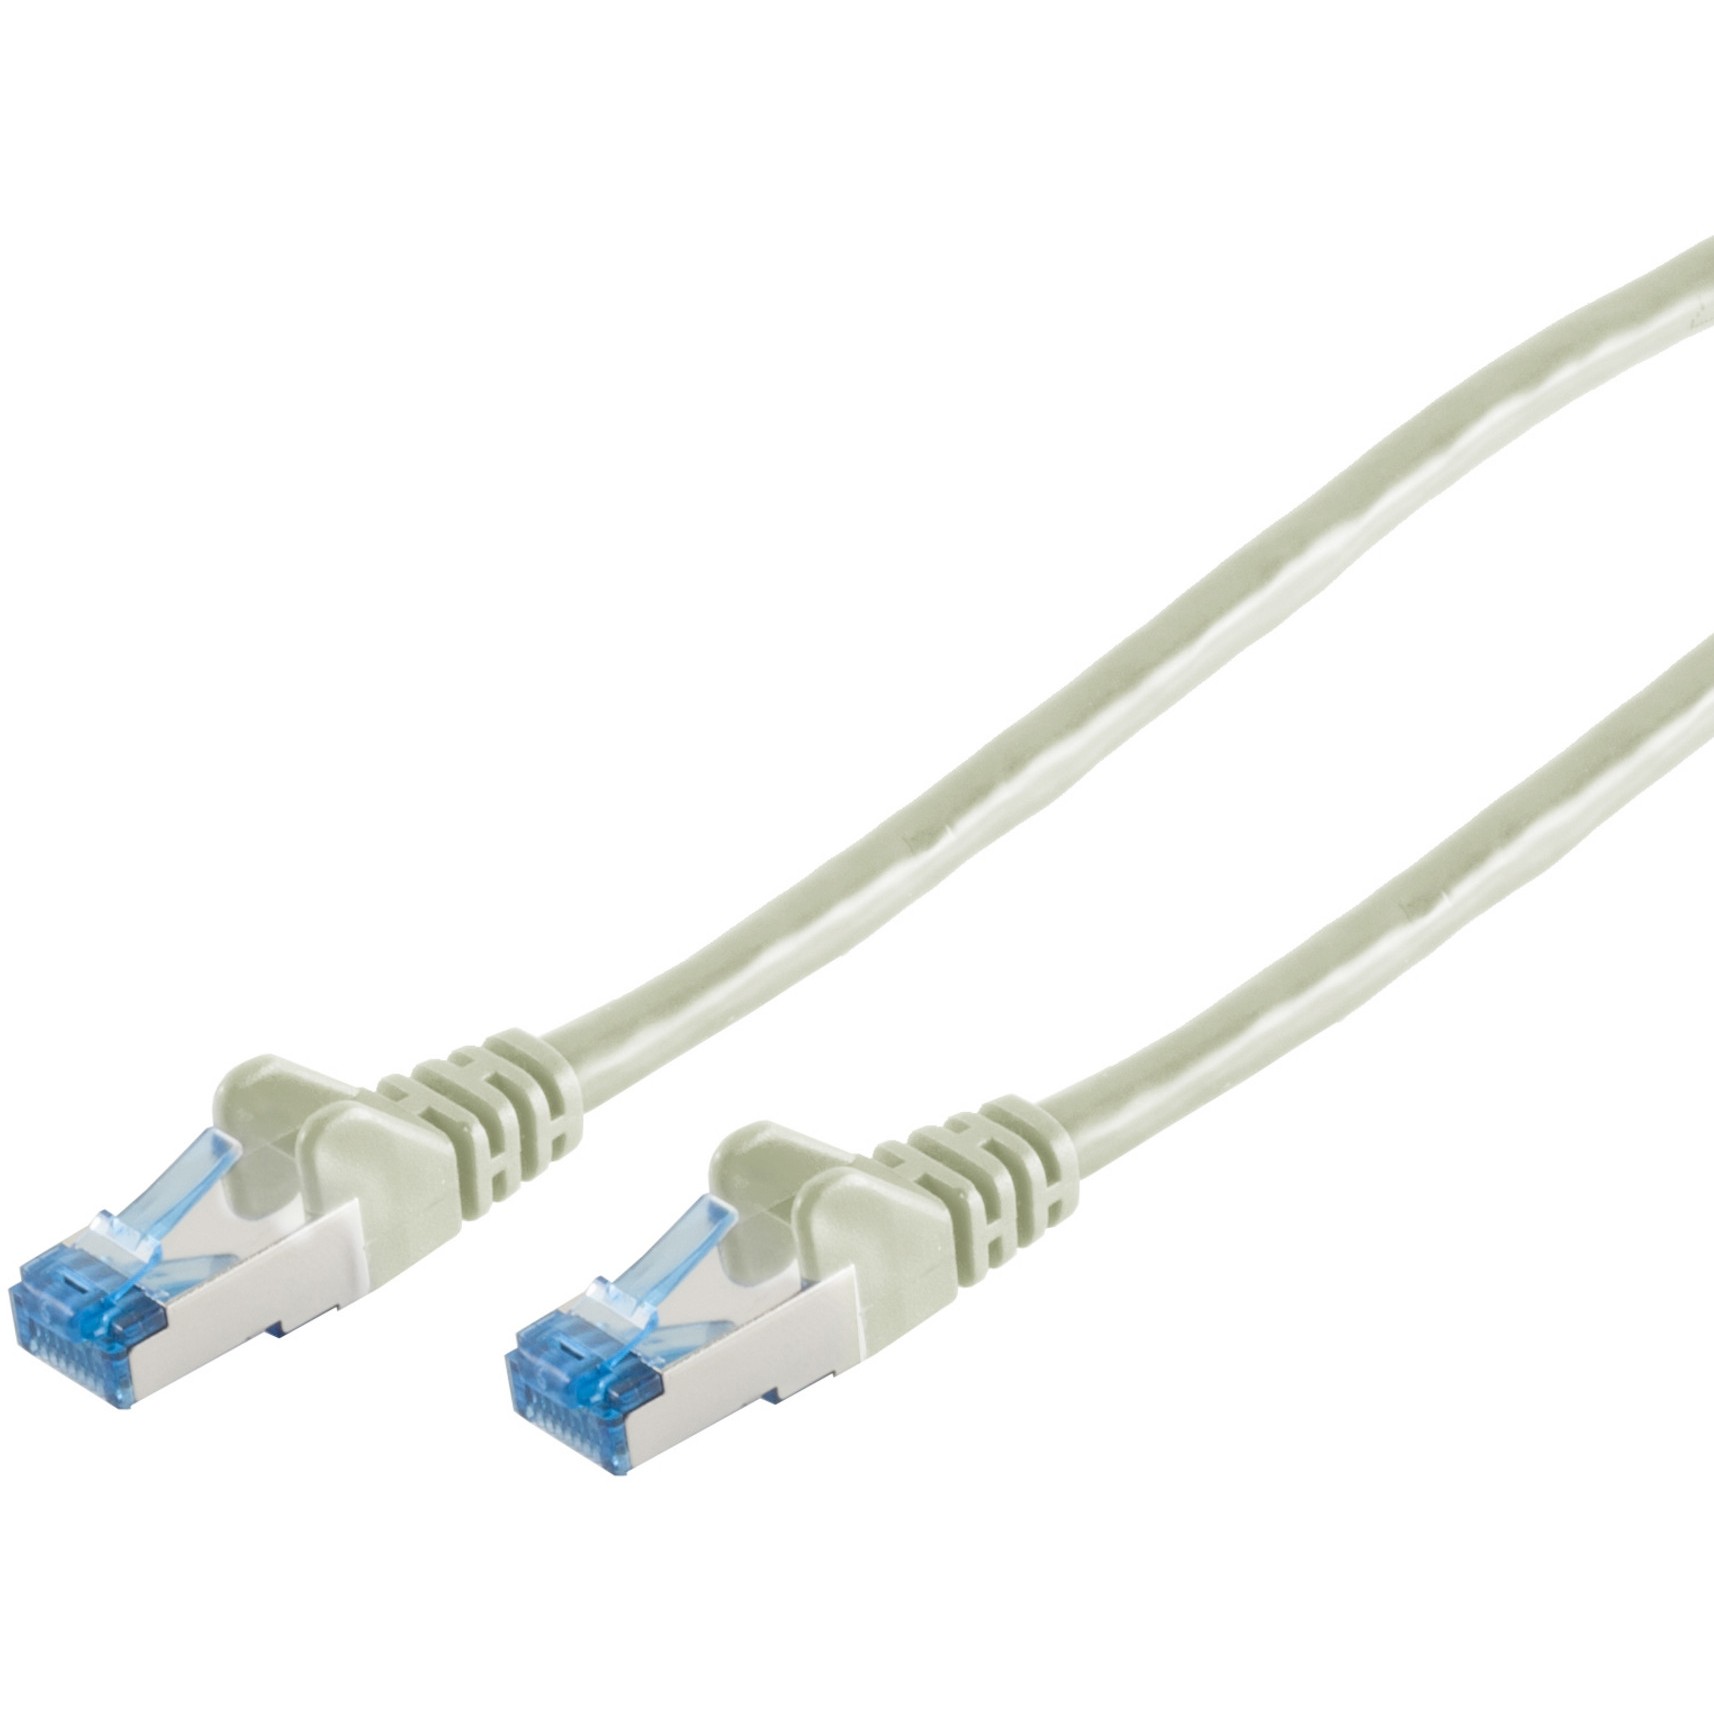 S-Conn 75725 networking cable